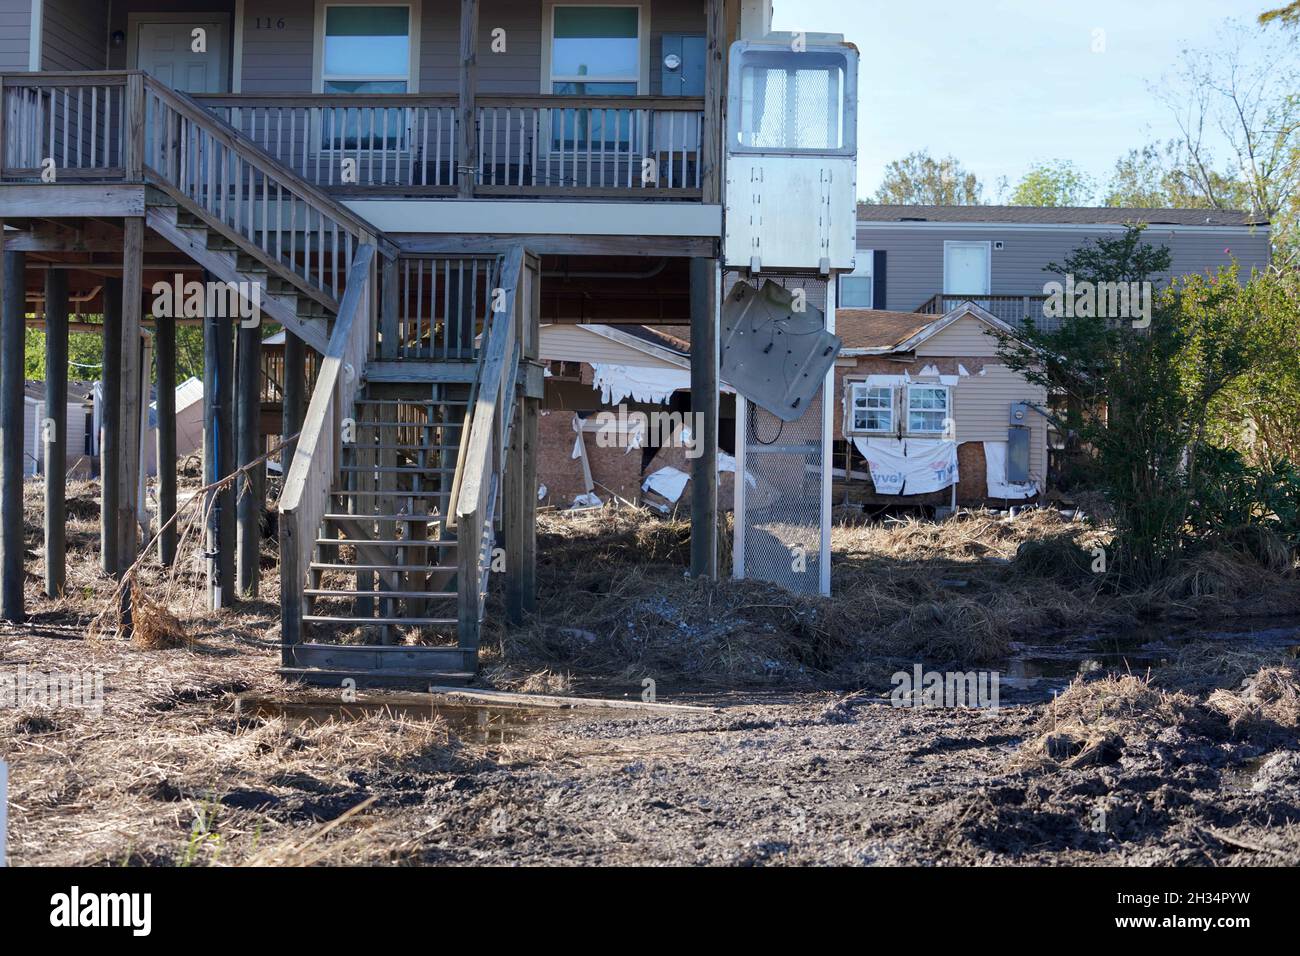 Ironton, United States of America. 24 September, 2021. Destroyed homes and buildings litter the area in the aftermath of Hurricane Ida September 24, 2021 in Ironton, Louisiana. Credit: Julie Joseph/FEMA/Alamy Live News Stock Photo